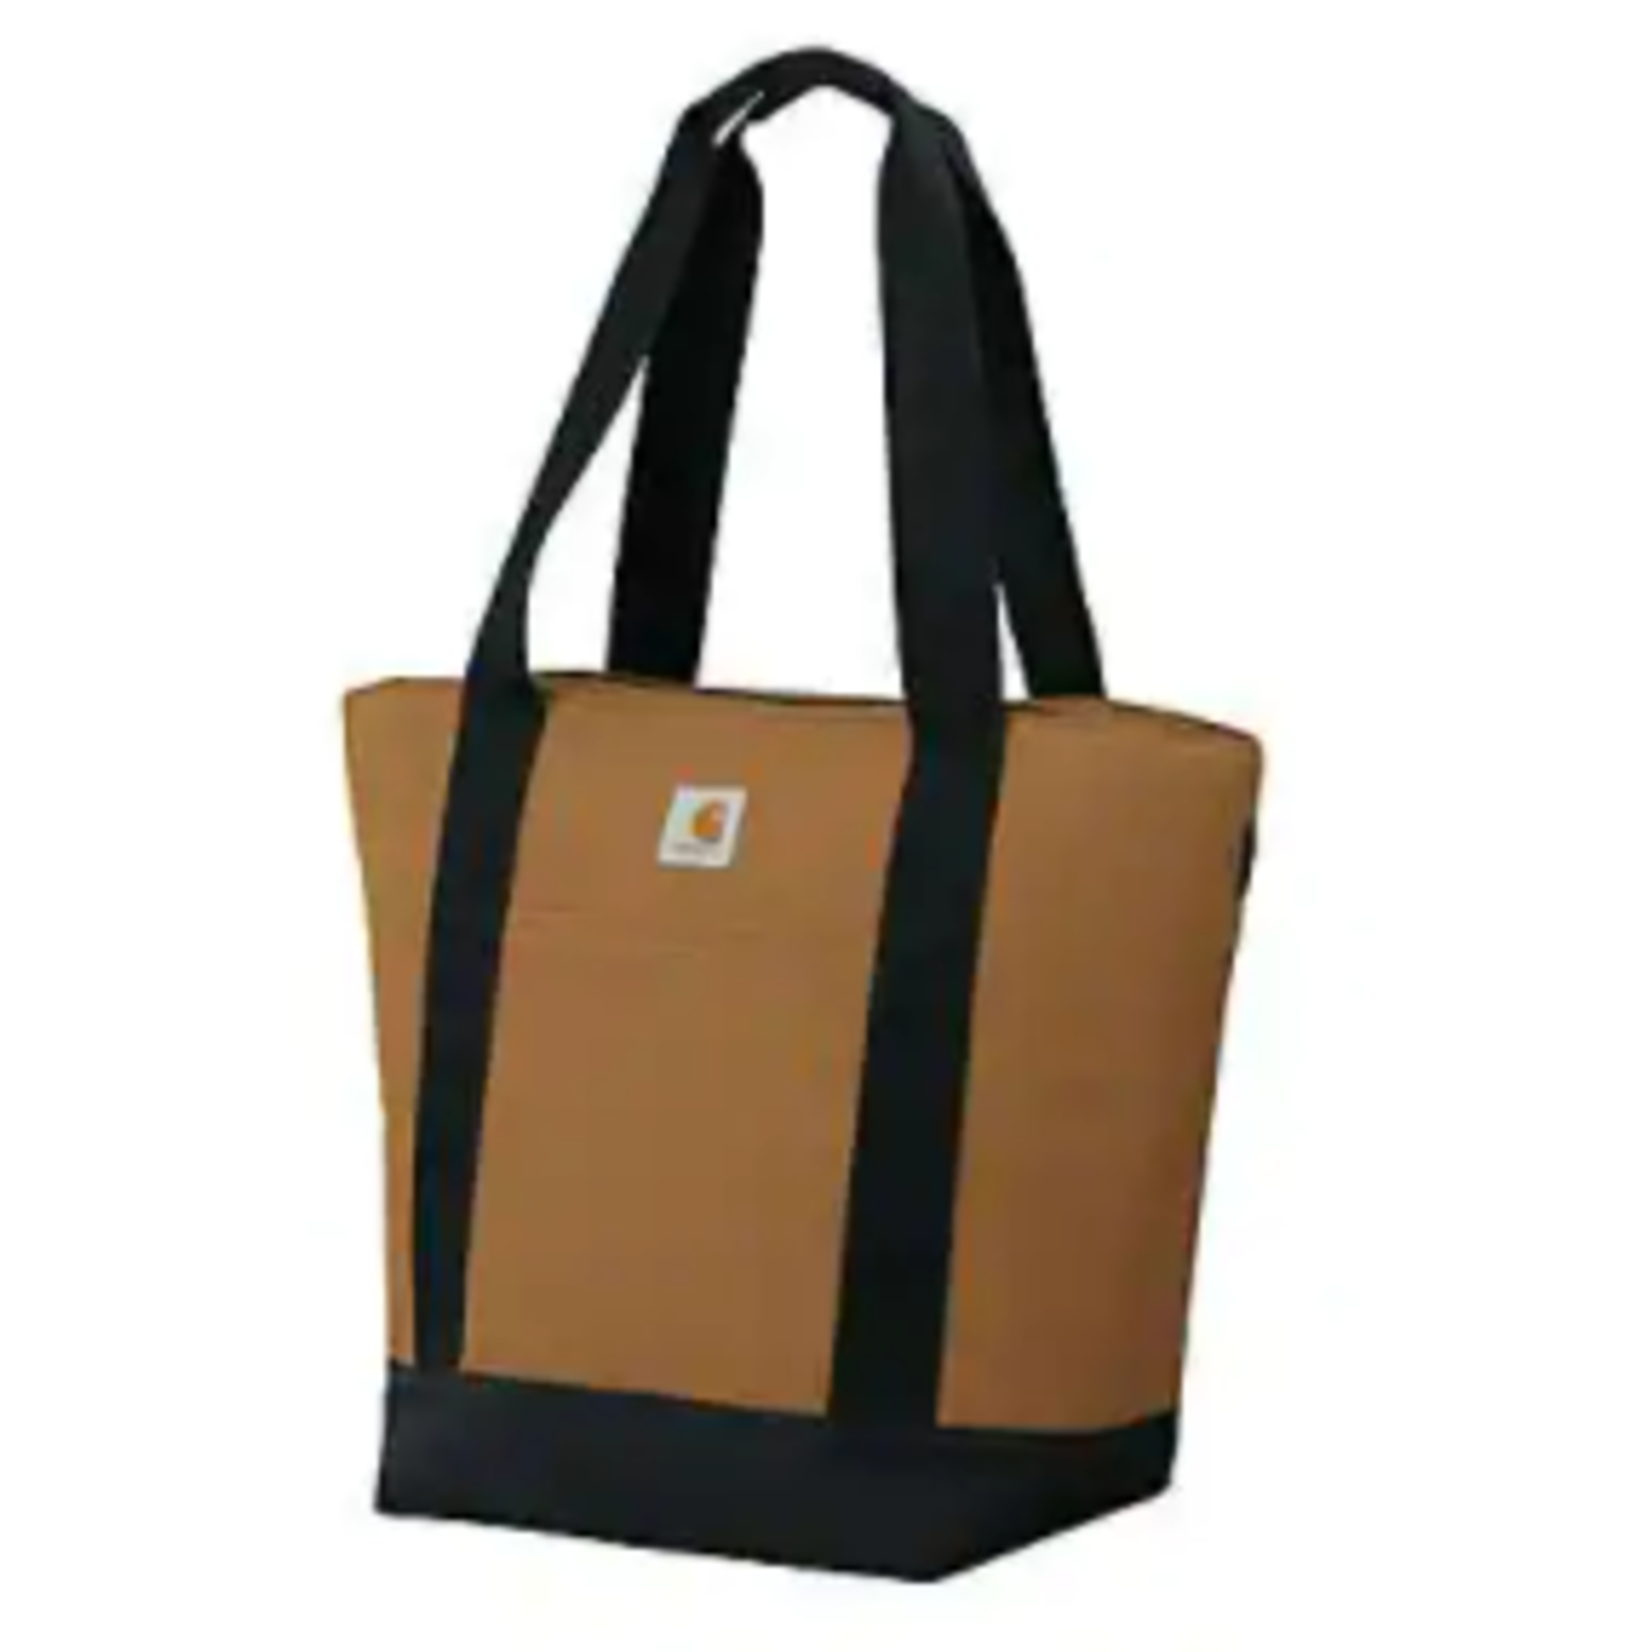 Carhartt Carhartt Large Insulated Tote